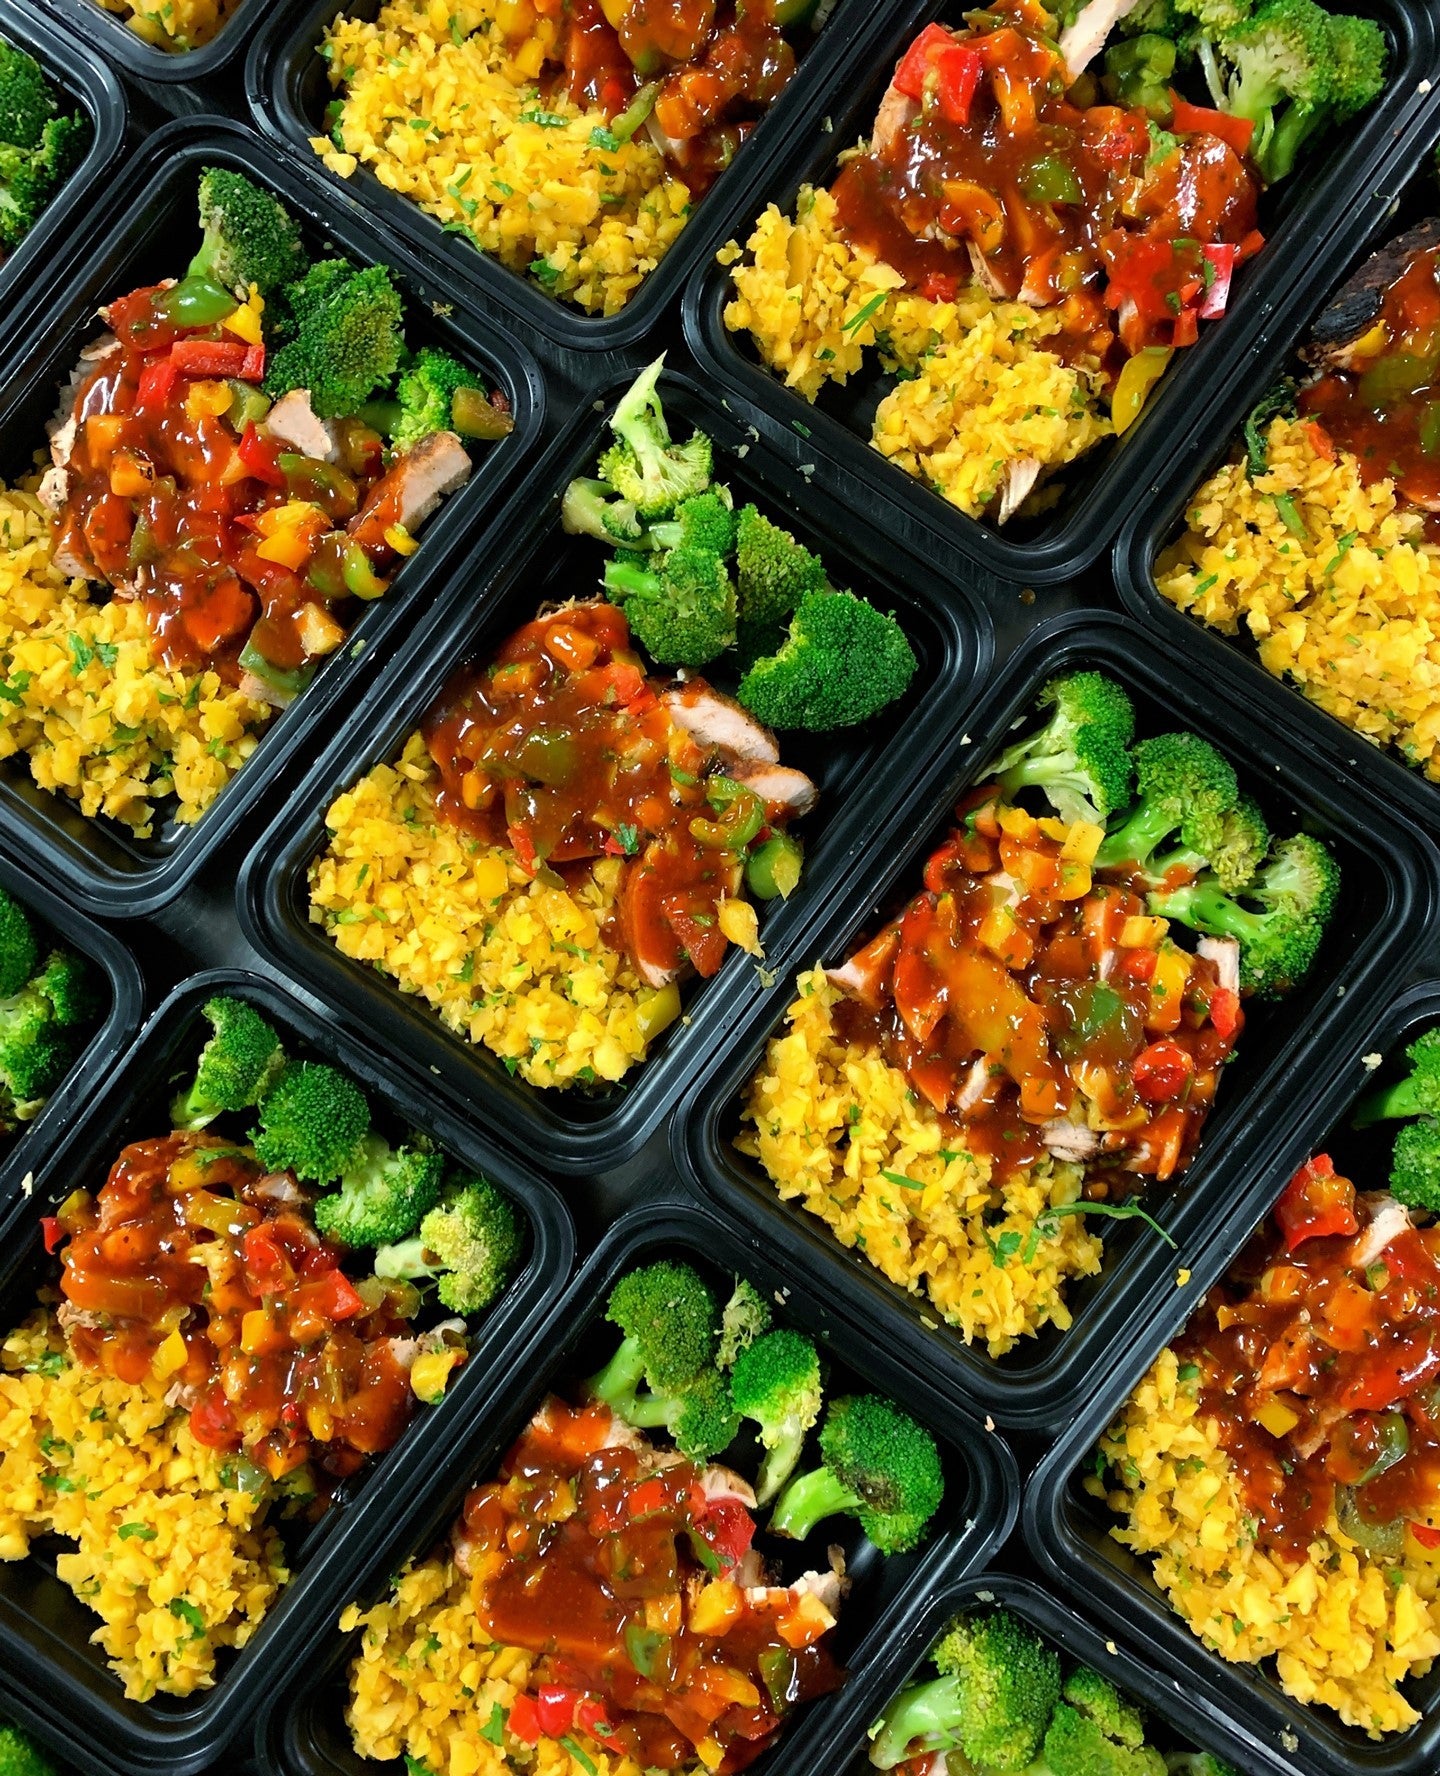 Eco-Friendly Meal Prep Containers: Wholesale & Bulk